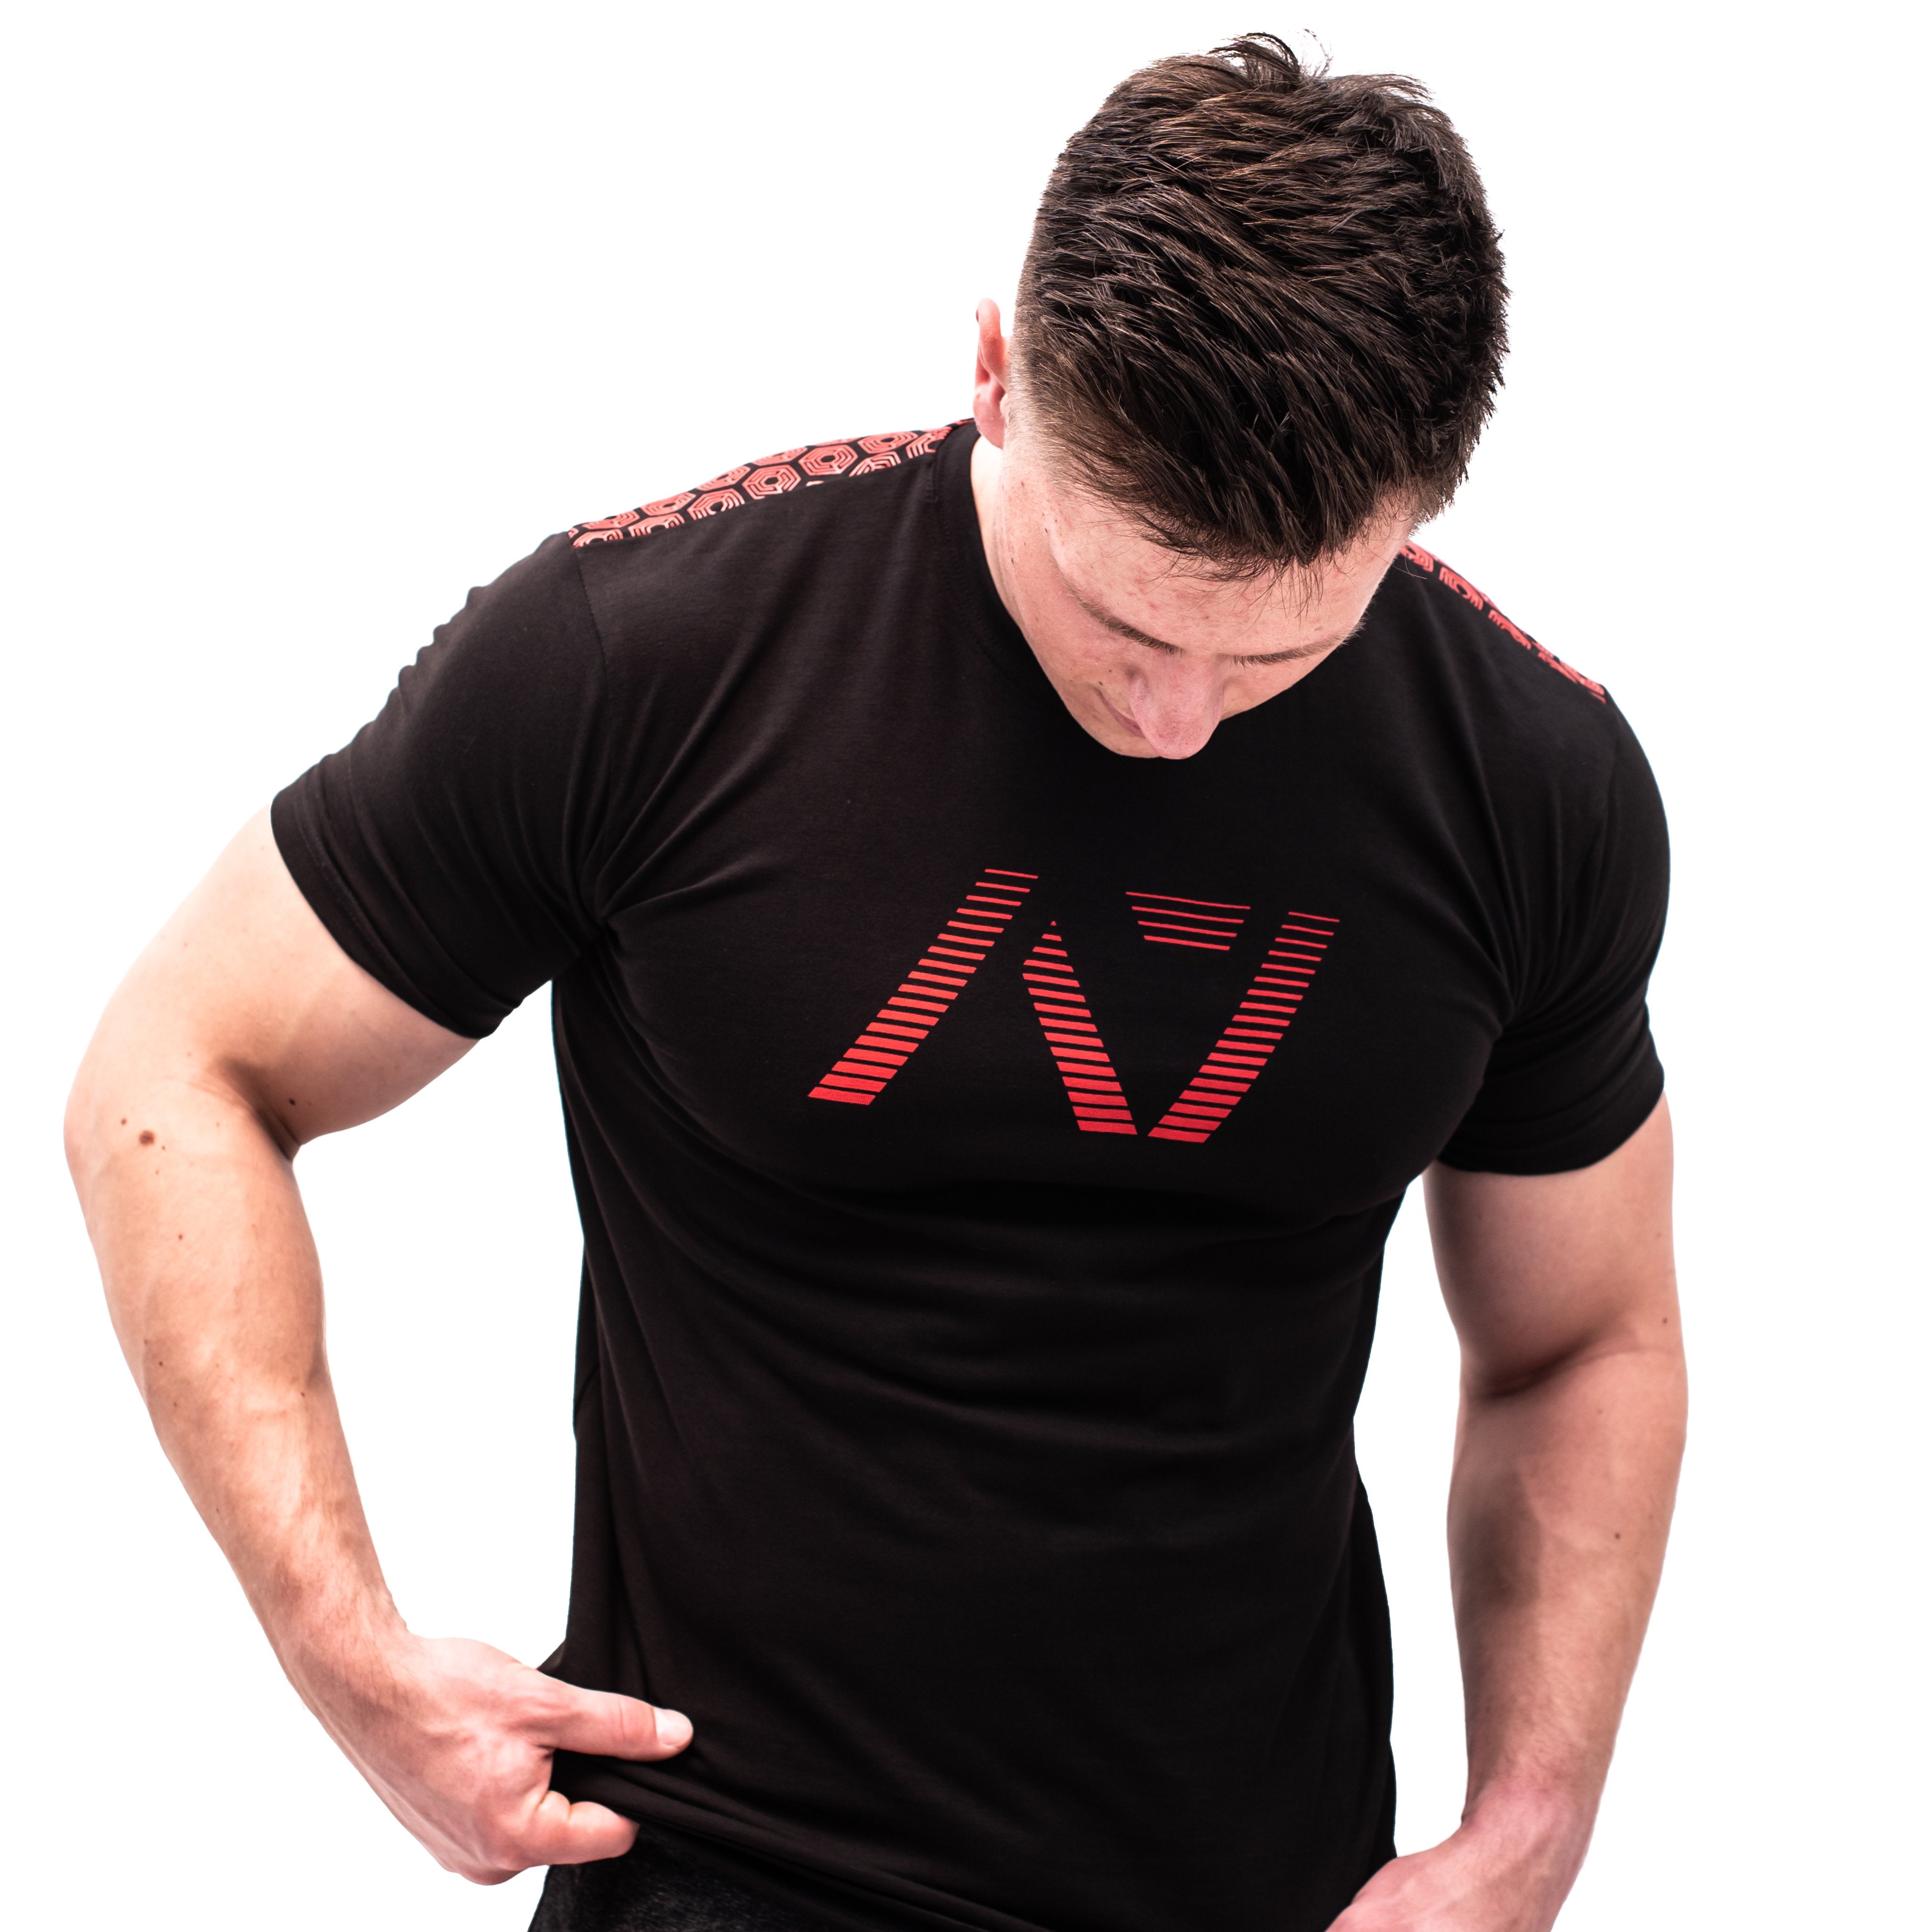 A7 Bar Grip T-shirt is great as a squat shirt as well as for bench pressing. The perfect grip shirt. Purchase your Bar Grip tshirt in Europe and the UK from www.A7UK.com. Purchase Bar Grip Shirt Europe from A7 UK. Best Bar Grip Tshirts, shipping to UK and Europe from A7 UK. The best Powerlifting apparel for all your workouts. Available in UK and Europe including France, Italy, Germany, Sweden and Poland